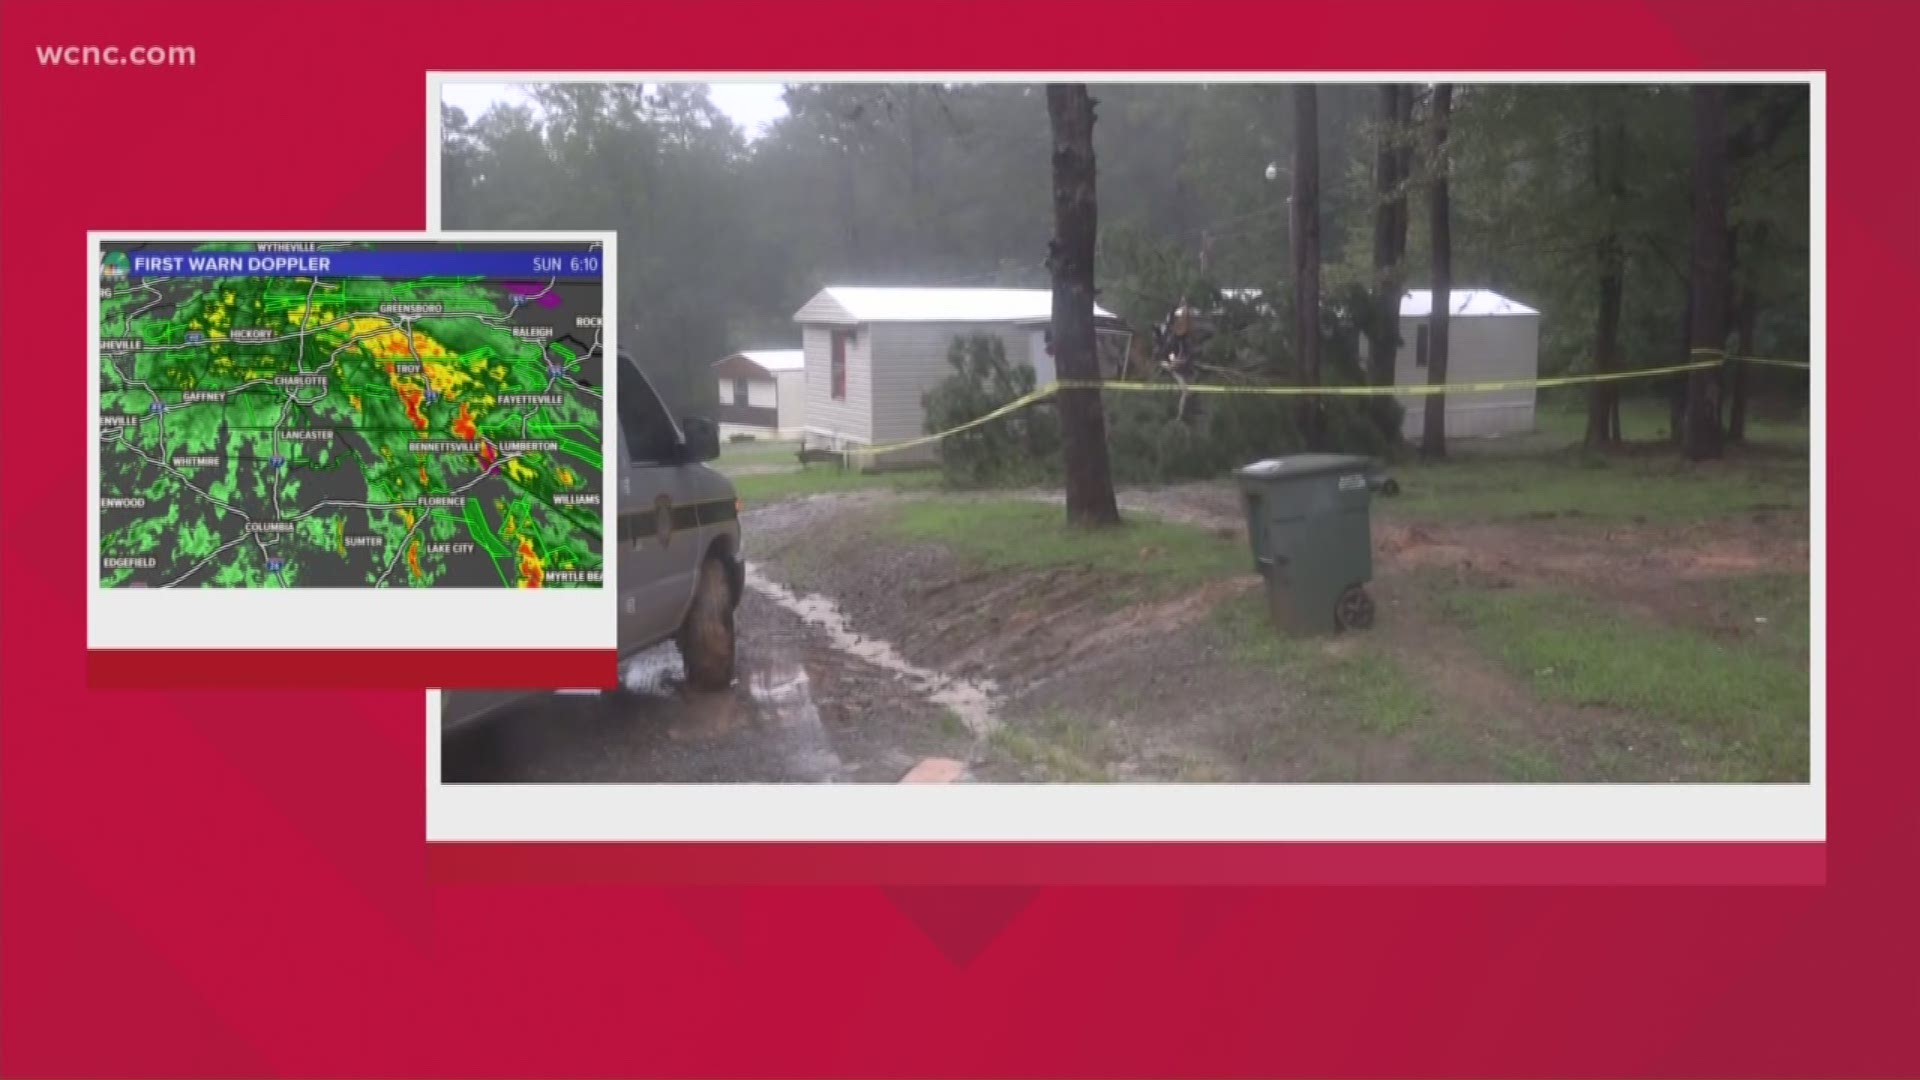 A baby was killed when a tree fell on a mobile home in Gaston County.